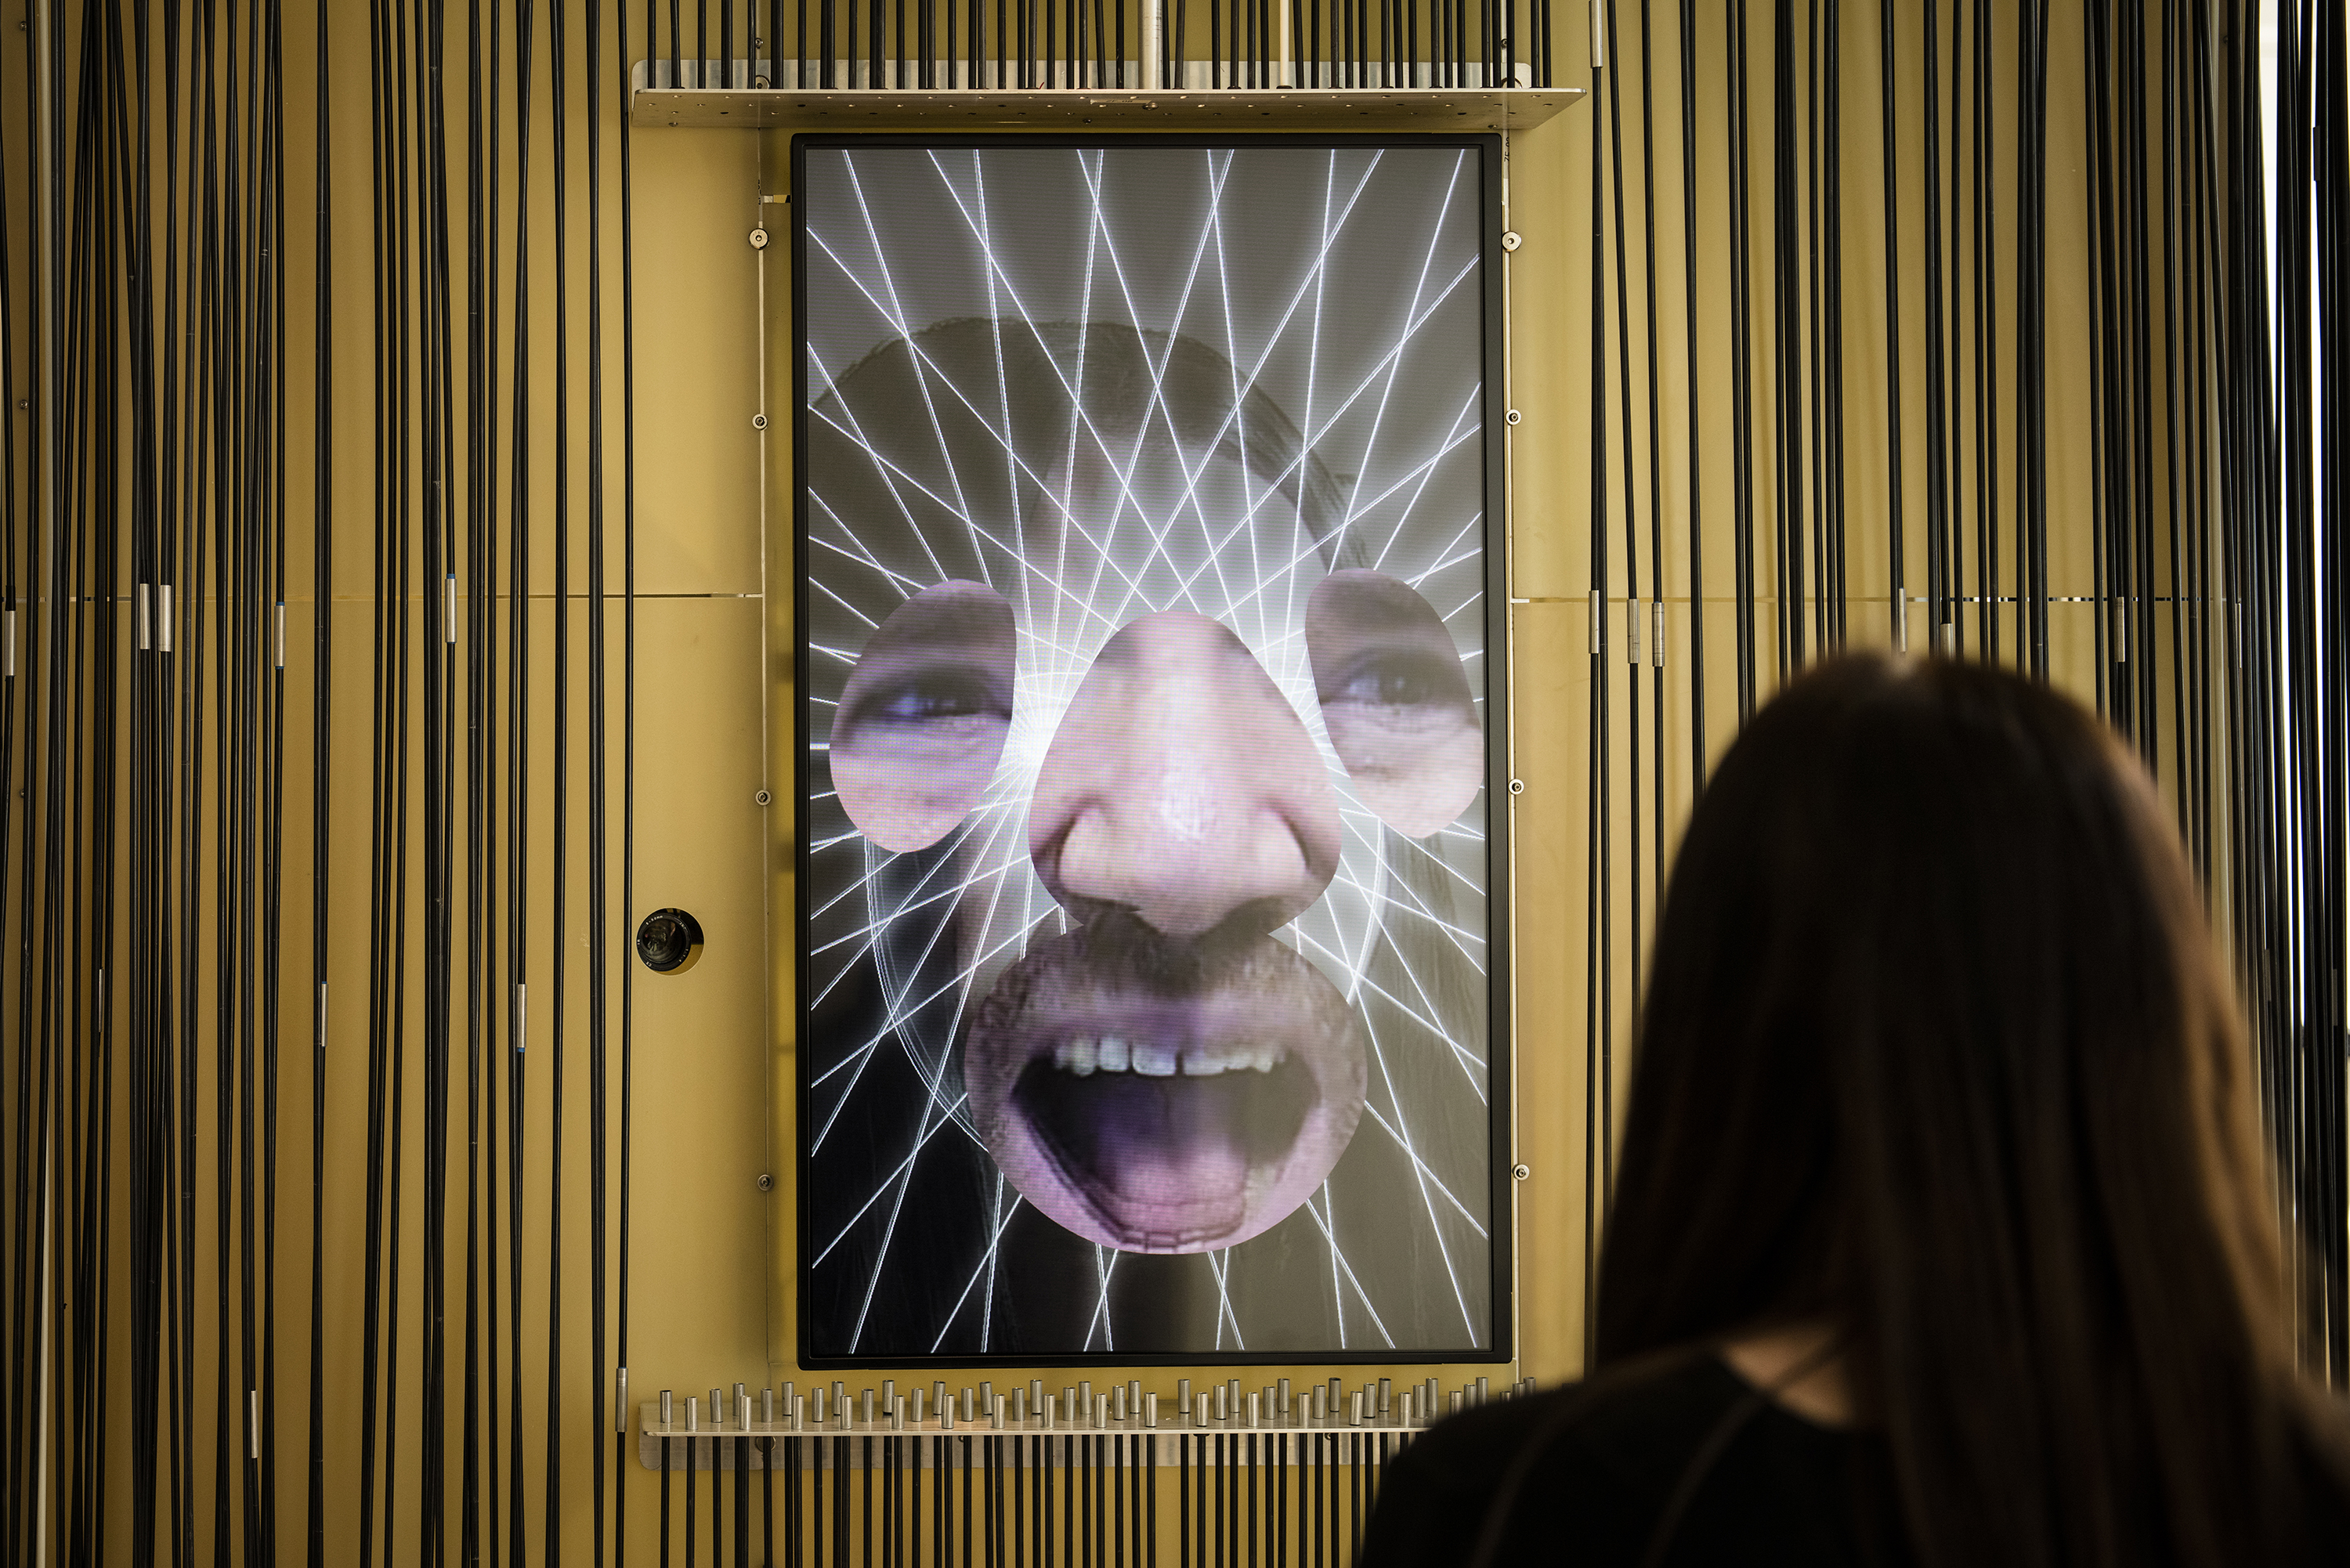 On a digital screen floats blobs containing an eye, nose, and mouth. A seated person with long brown hair is looking at the screen. The screen is surrounded by a gold frame with long black cords / wires around it.